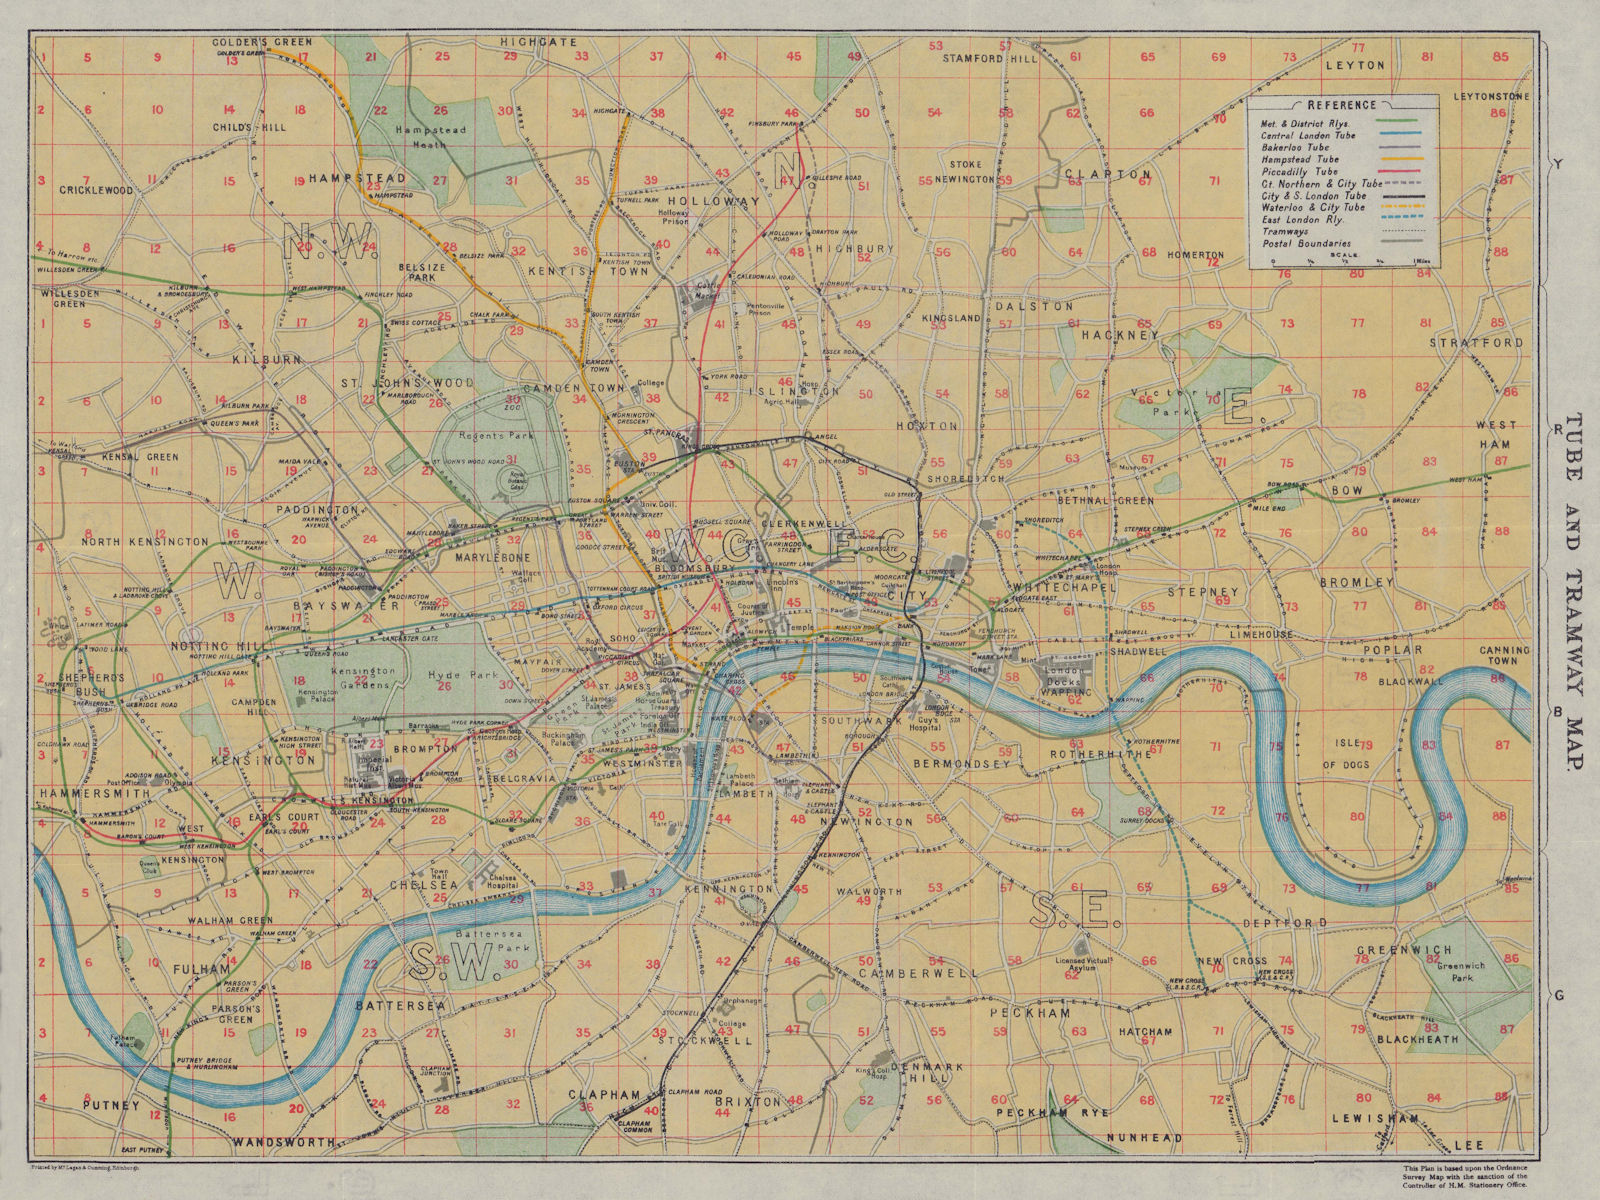 Associate Product Tube and Tramway map of London. Underground 1920 old antique plan chart